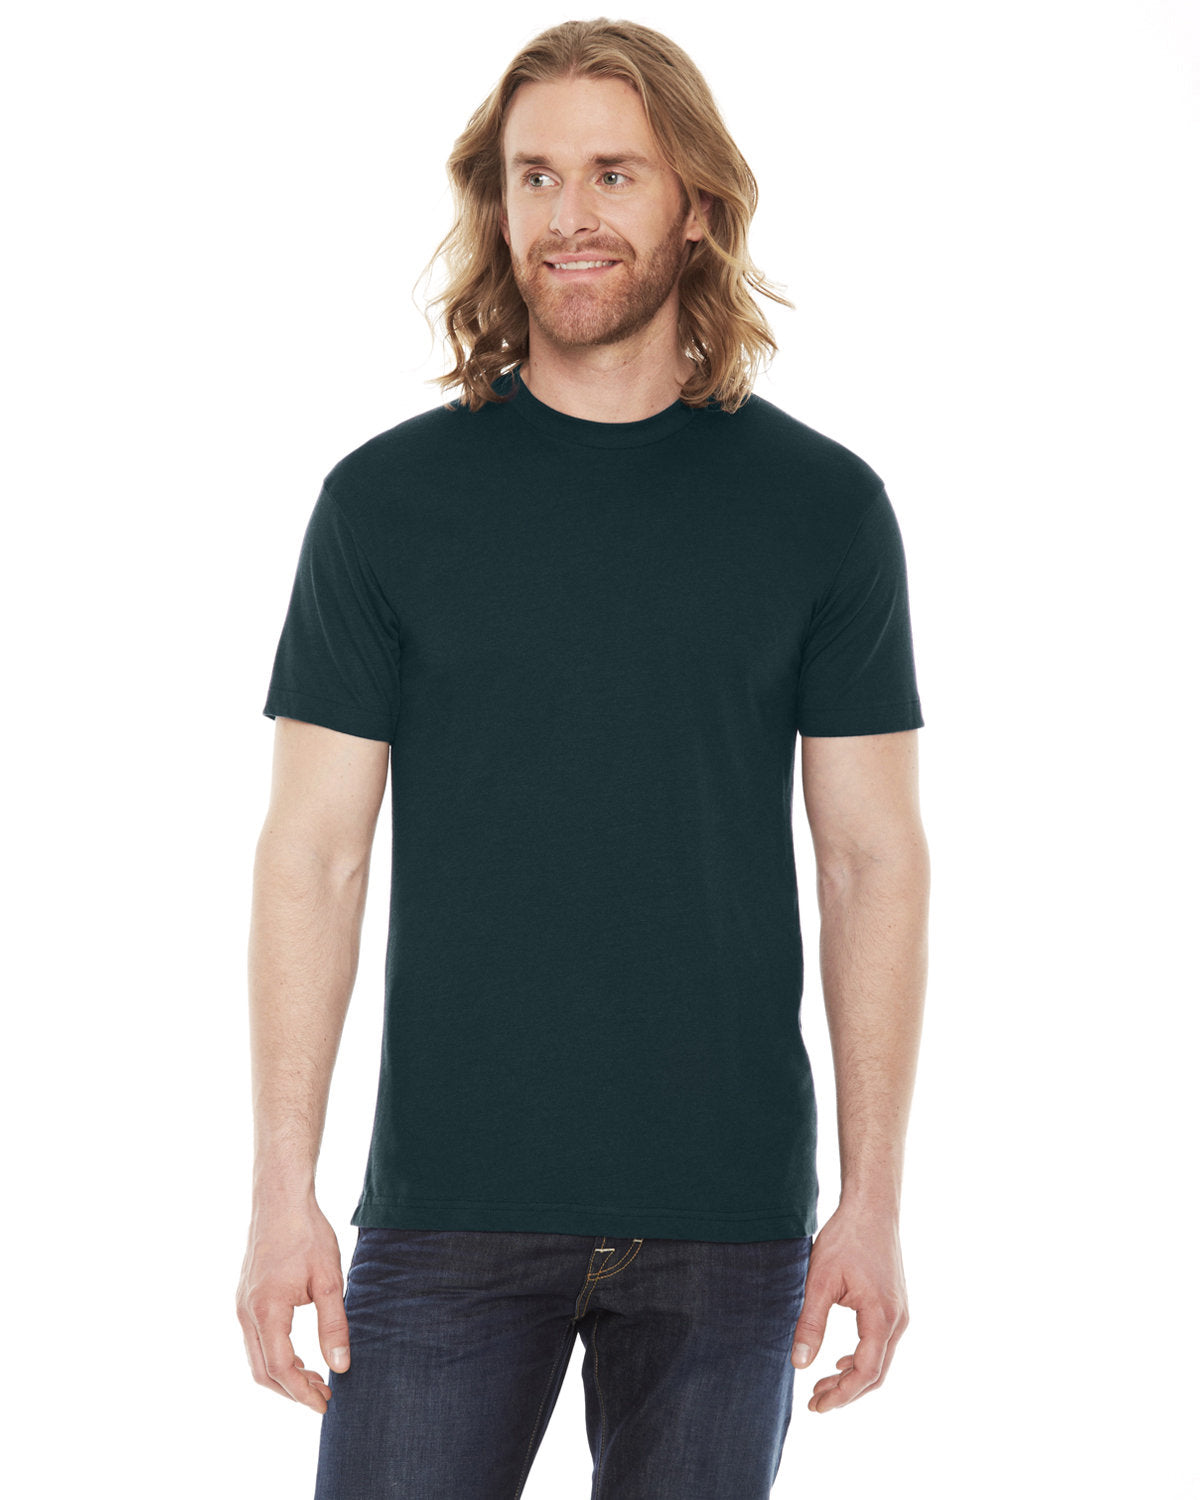 American Apparel Unisex Classic T-Shirt: Timeless Comfort and Style for All